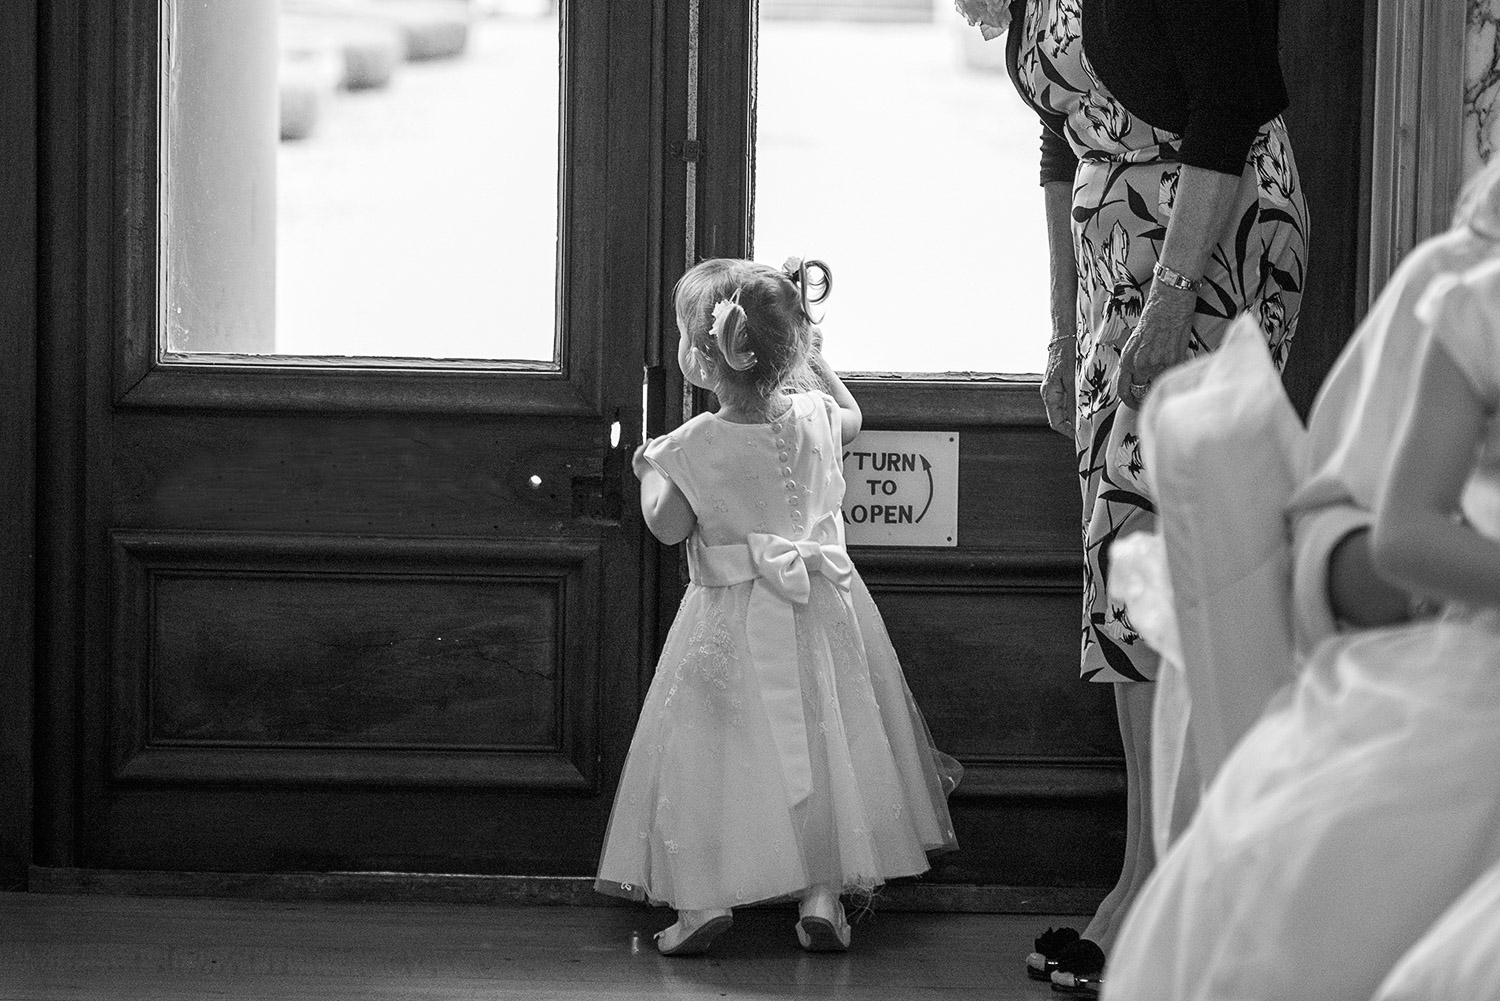 flower girl peeking out the window during a wedding